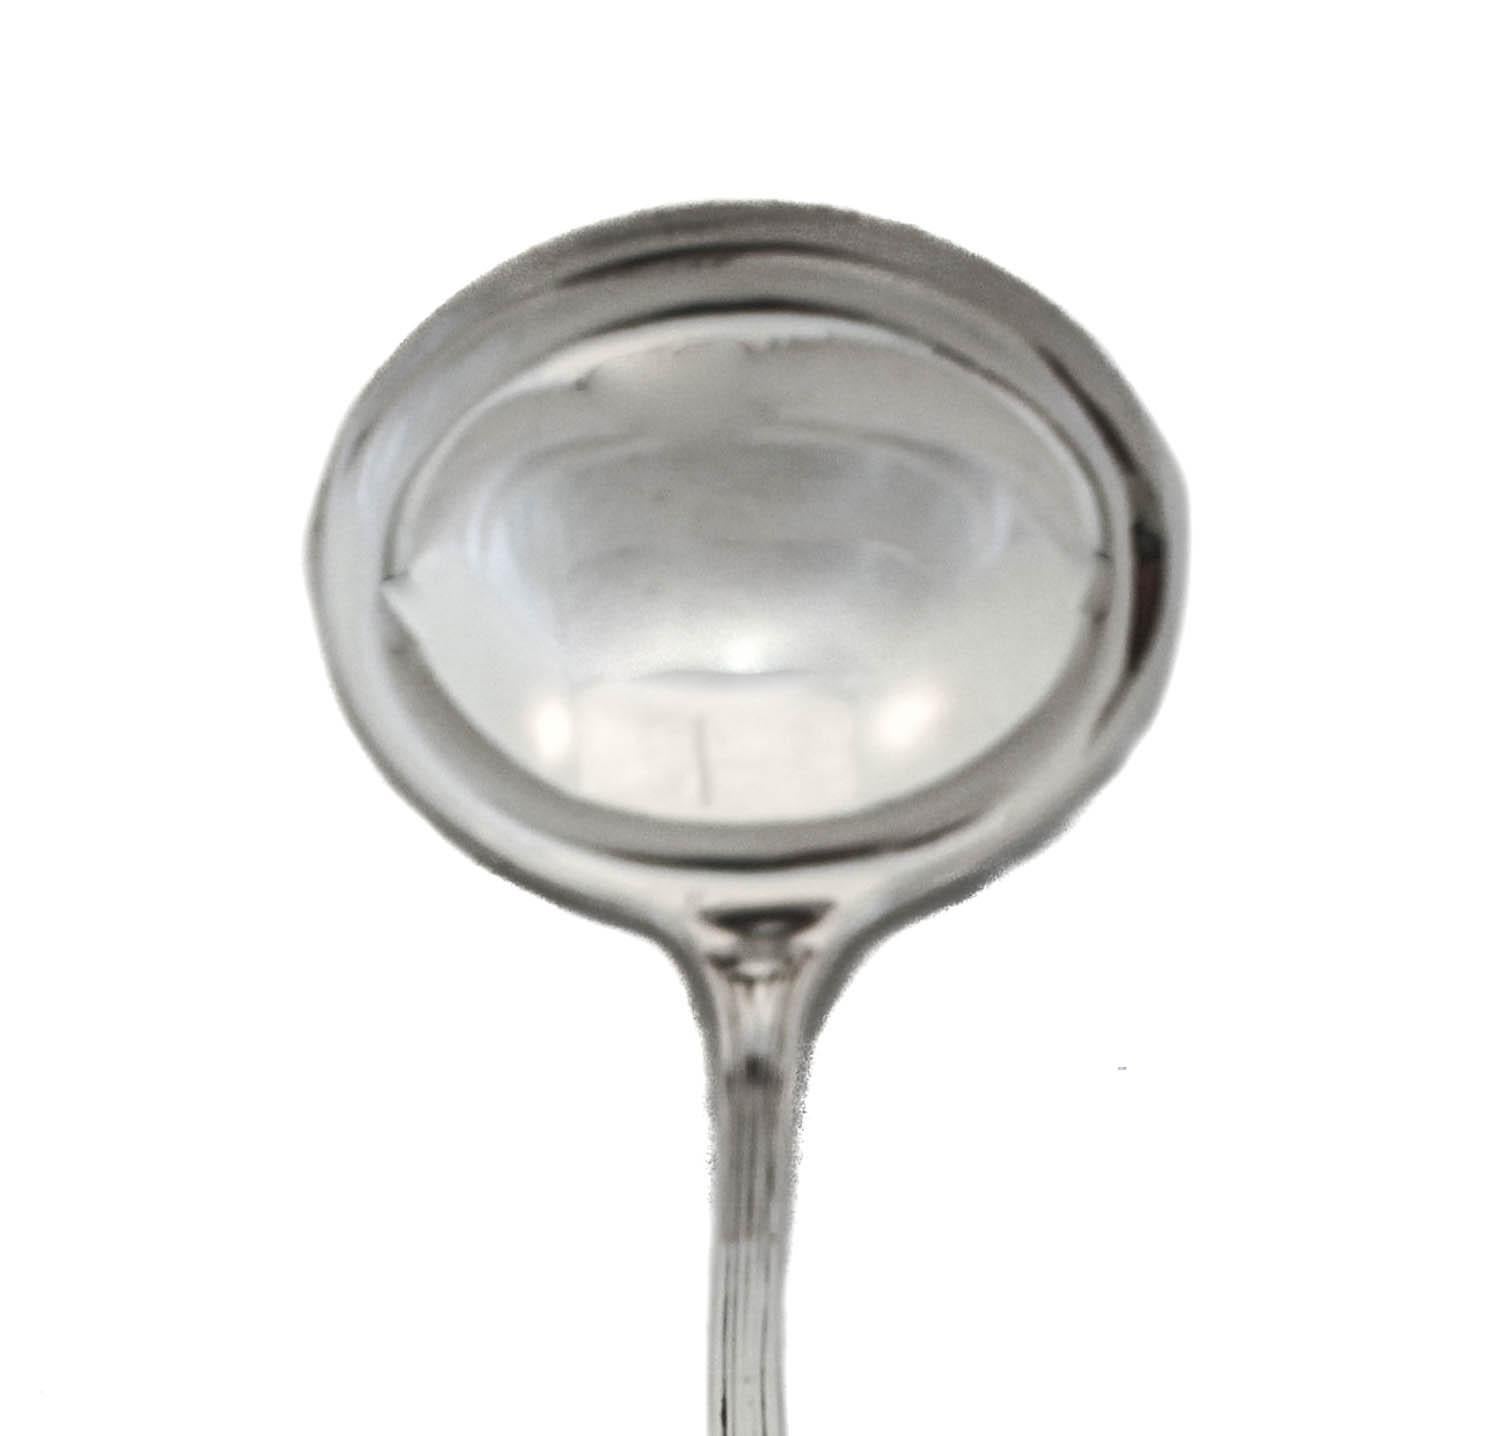 We are thrilled to offer you this sterling silver ladle in the “Audubon” pattern by the world renowned Tiffany & Company. Inspired by 19th-century Japanese paintings, the handle has a bird and floral motif. On the back there is more of the motif